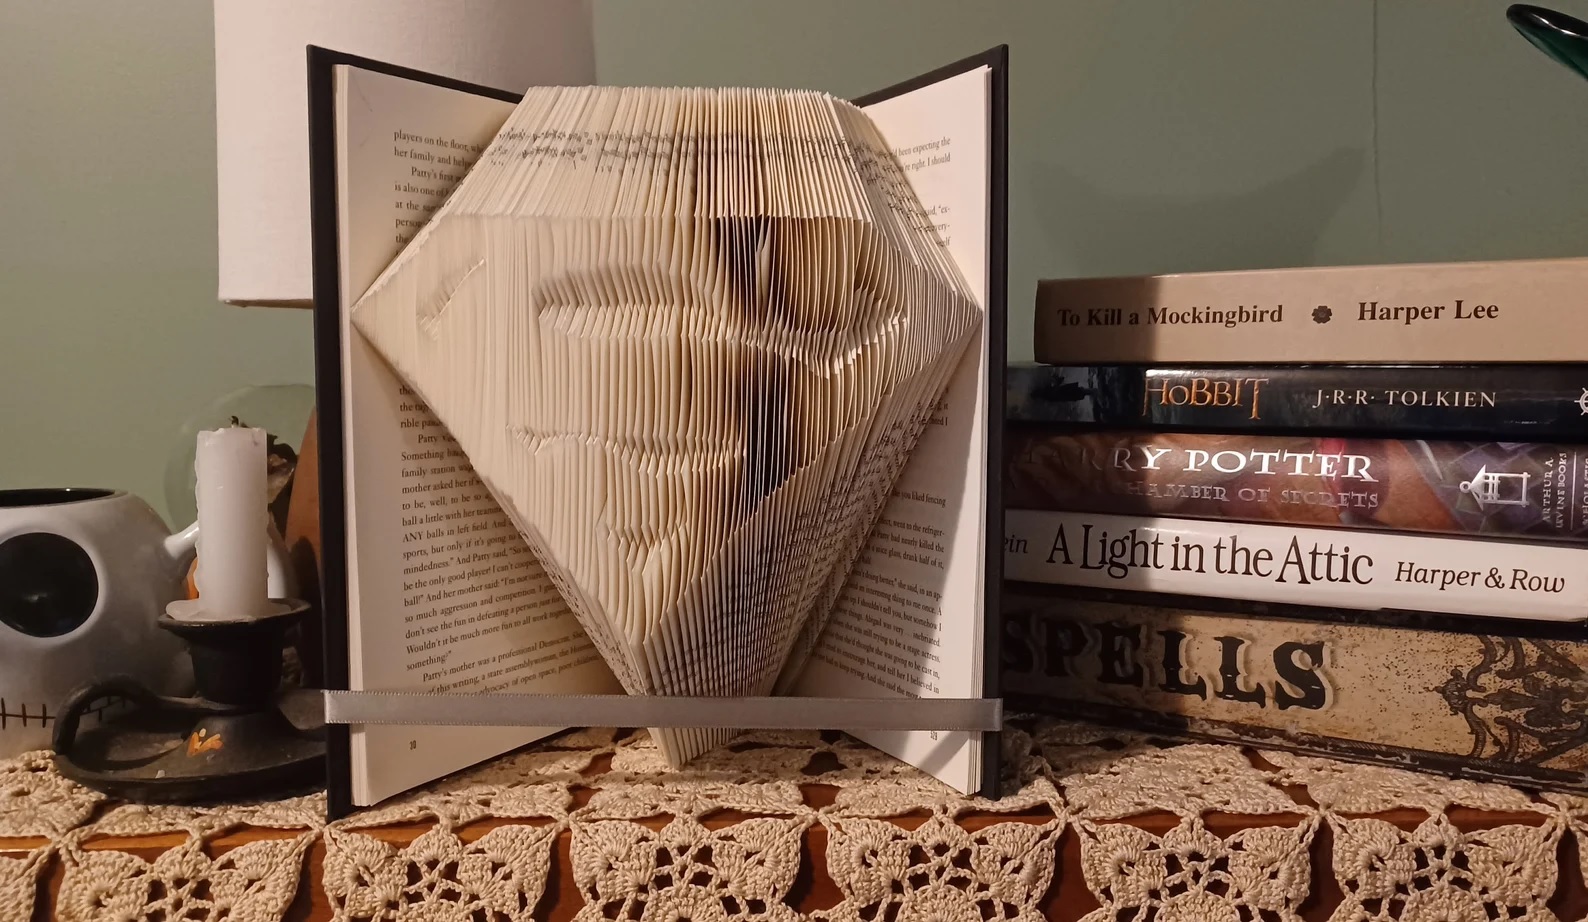 An open book where the pages have been cut into a 3D image of Superman's insignia